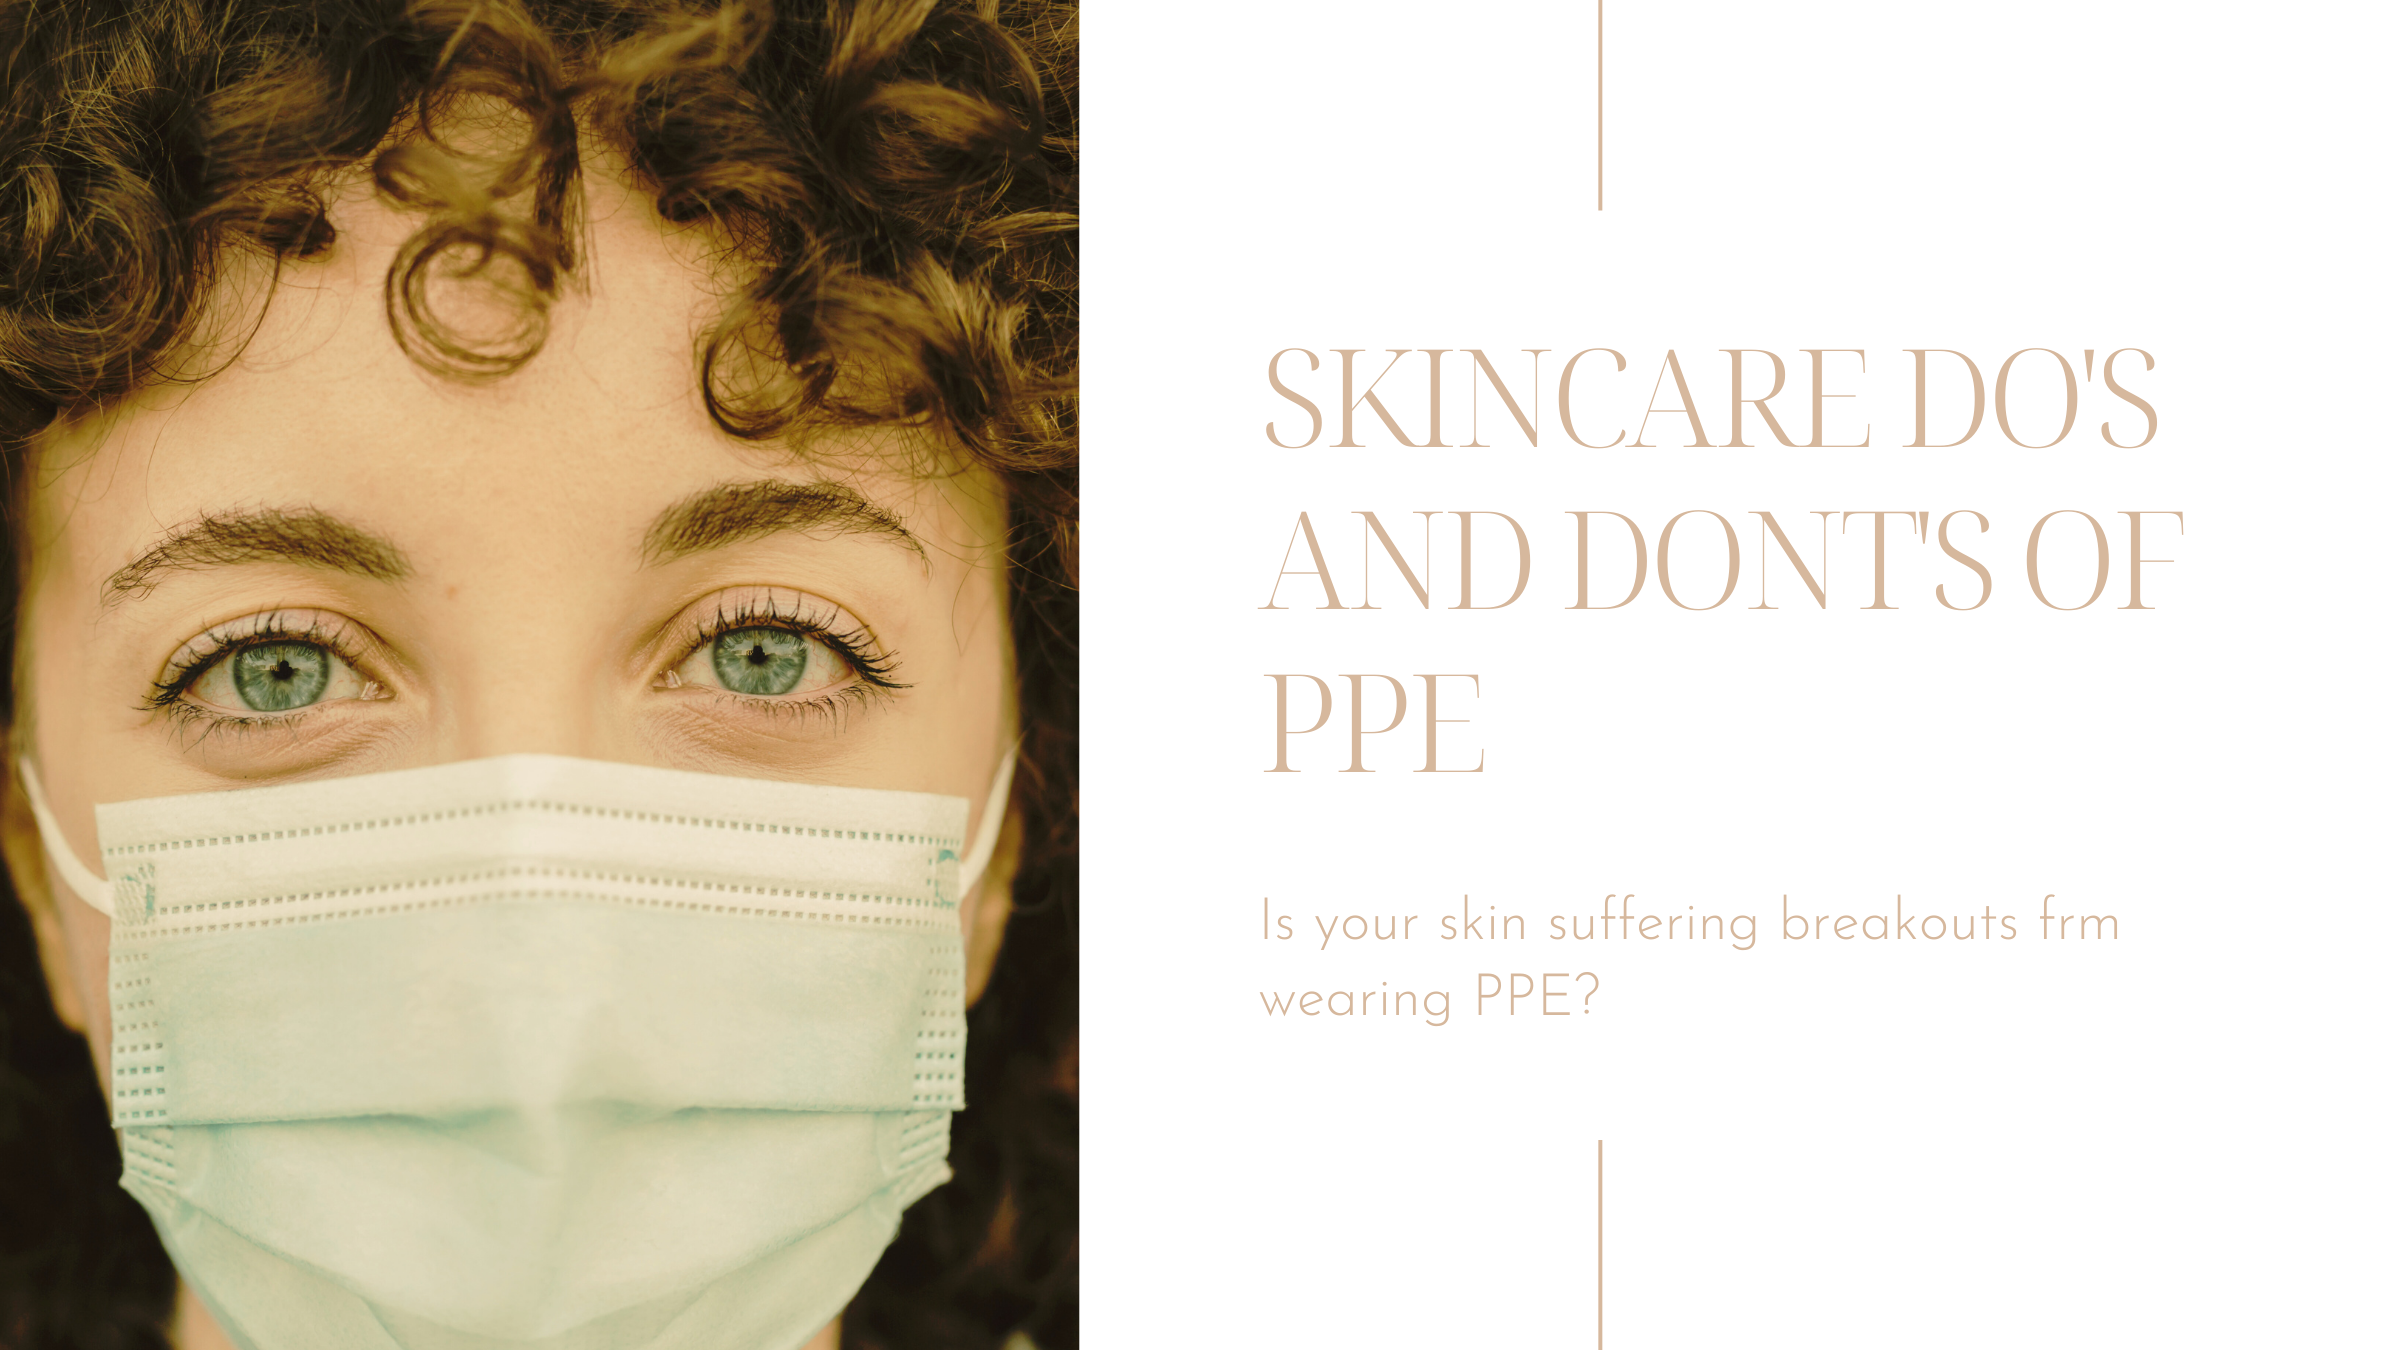 IS YOUR SKIN SUFFERING BREAKOUTS FROM WEARING PPE